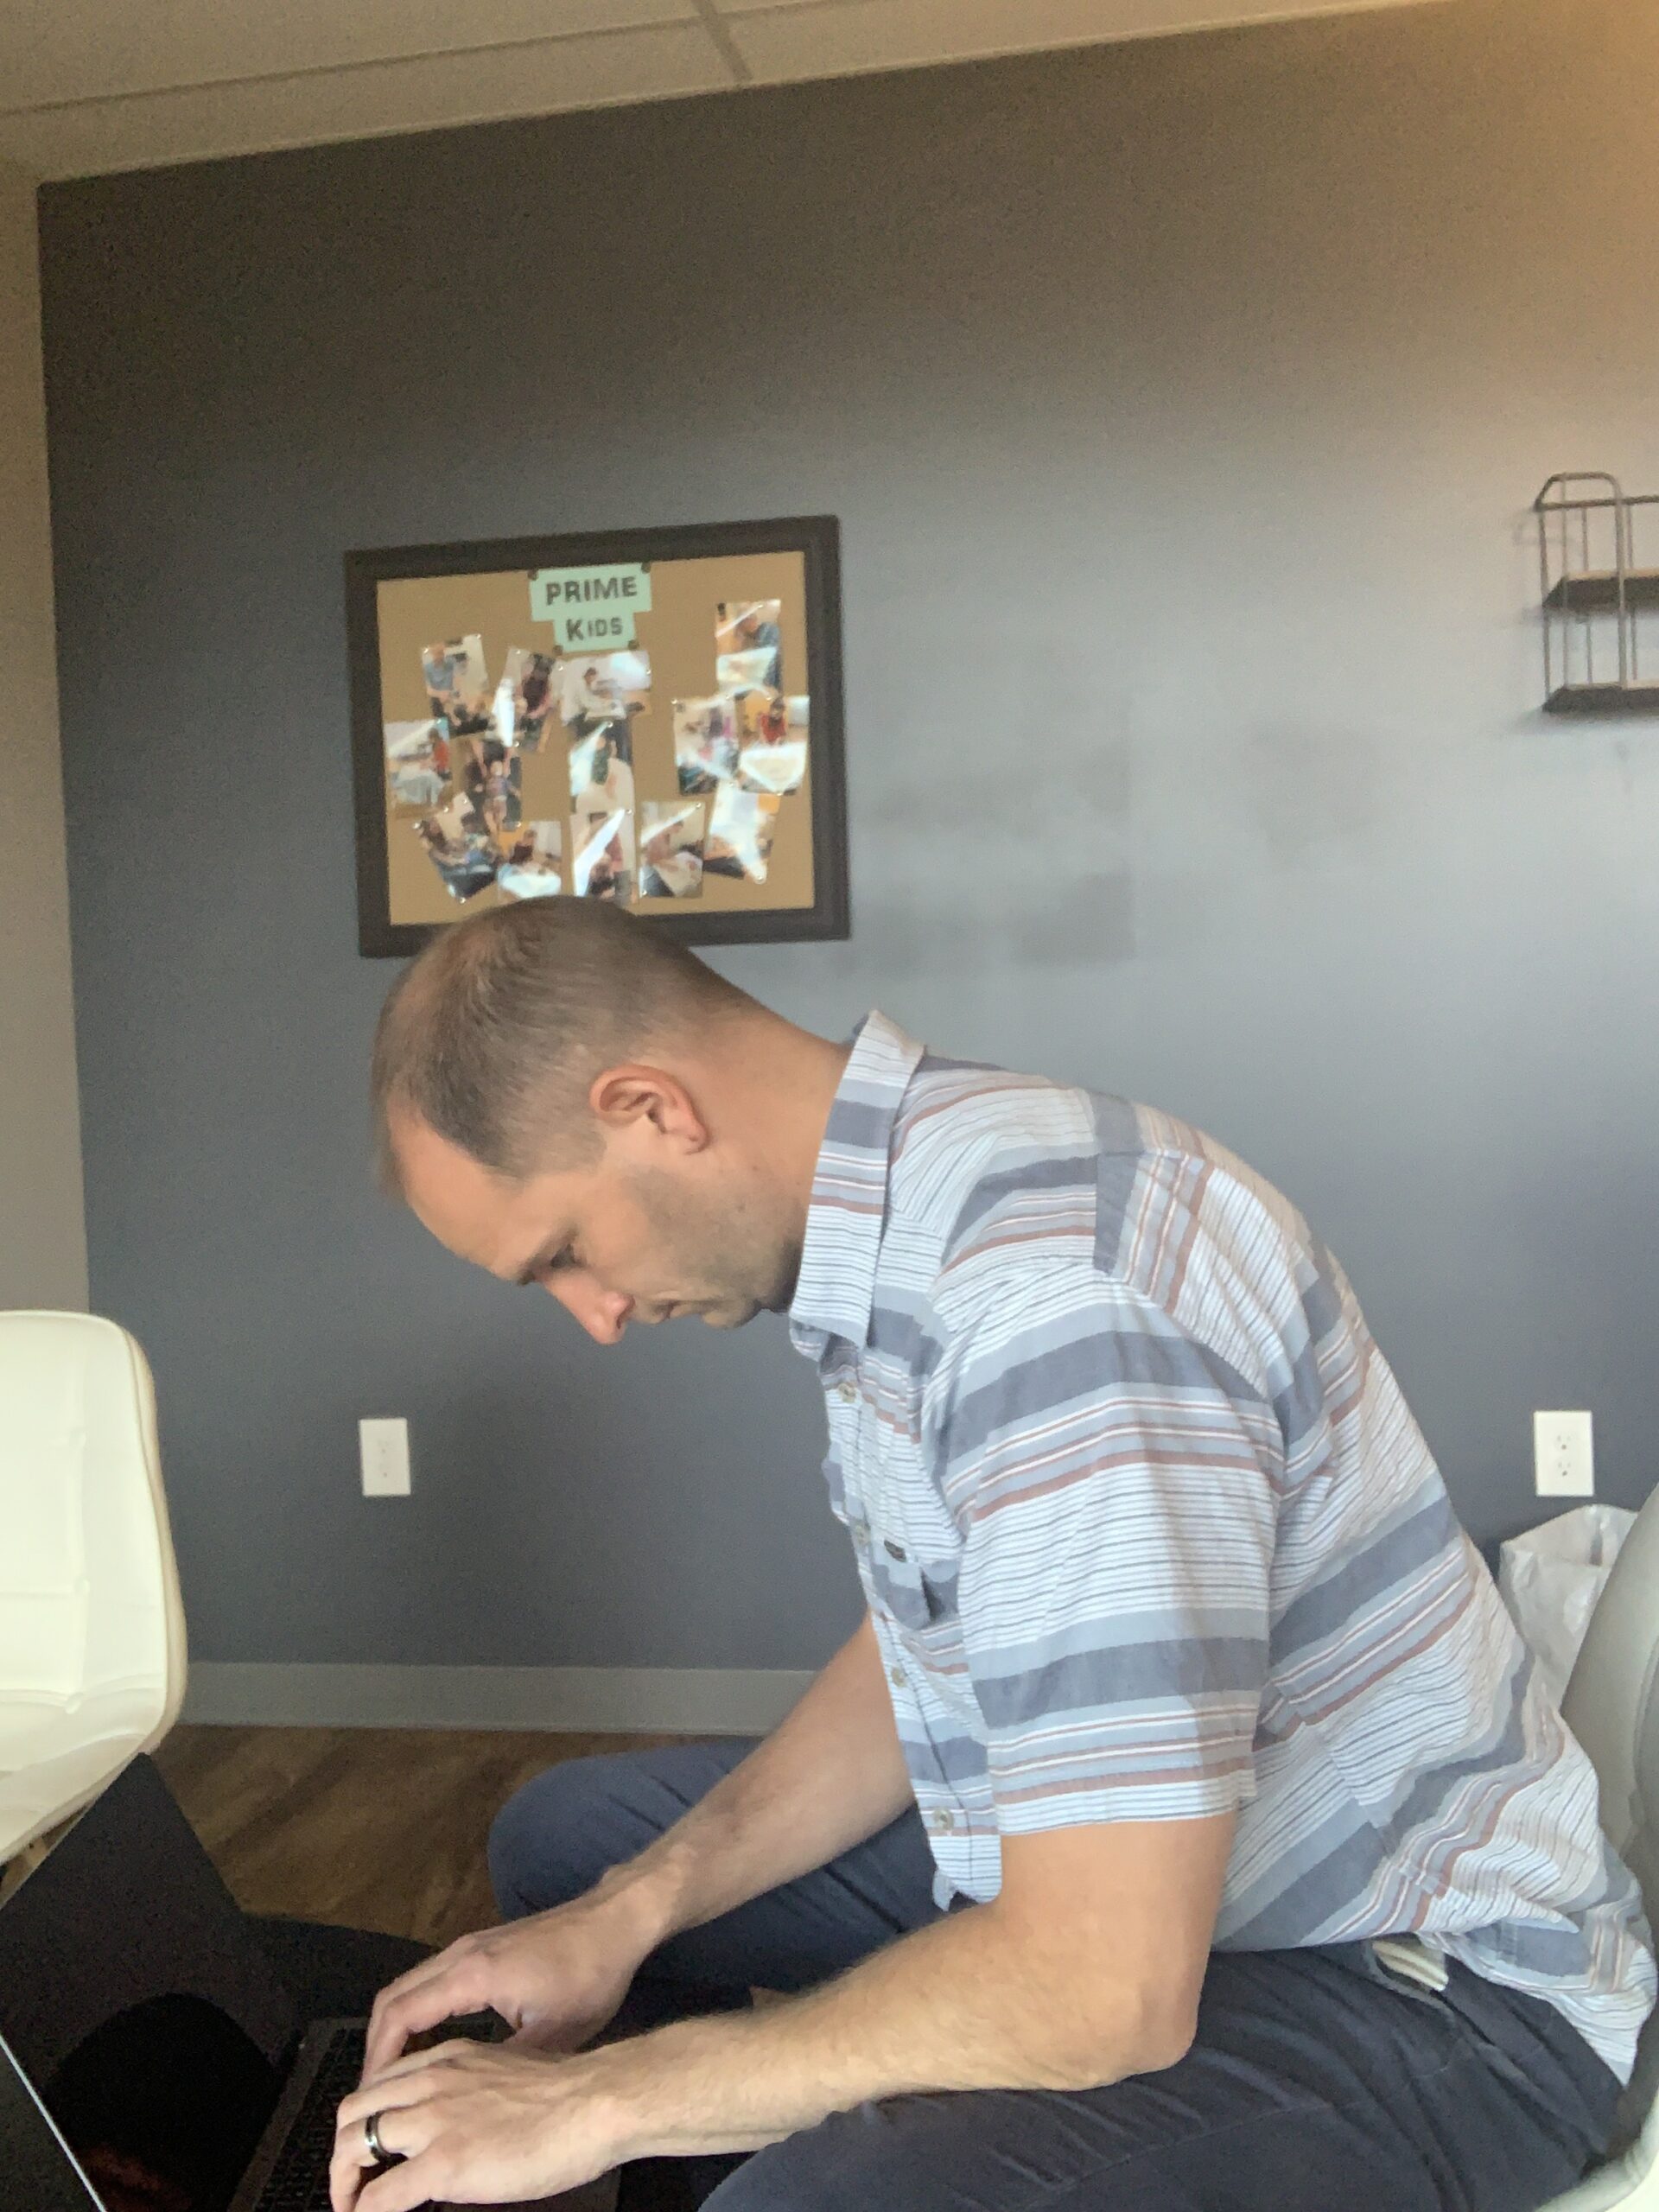 dr matt pennetti, prime chiropractic in centennial co, How to set up your desk while working from home